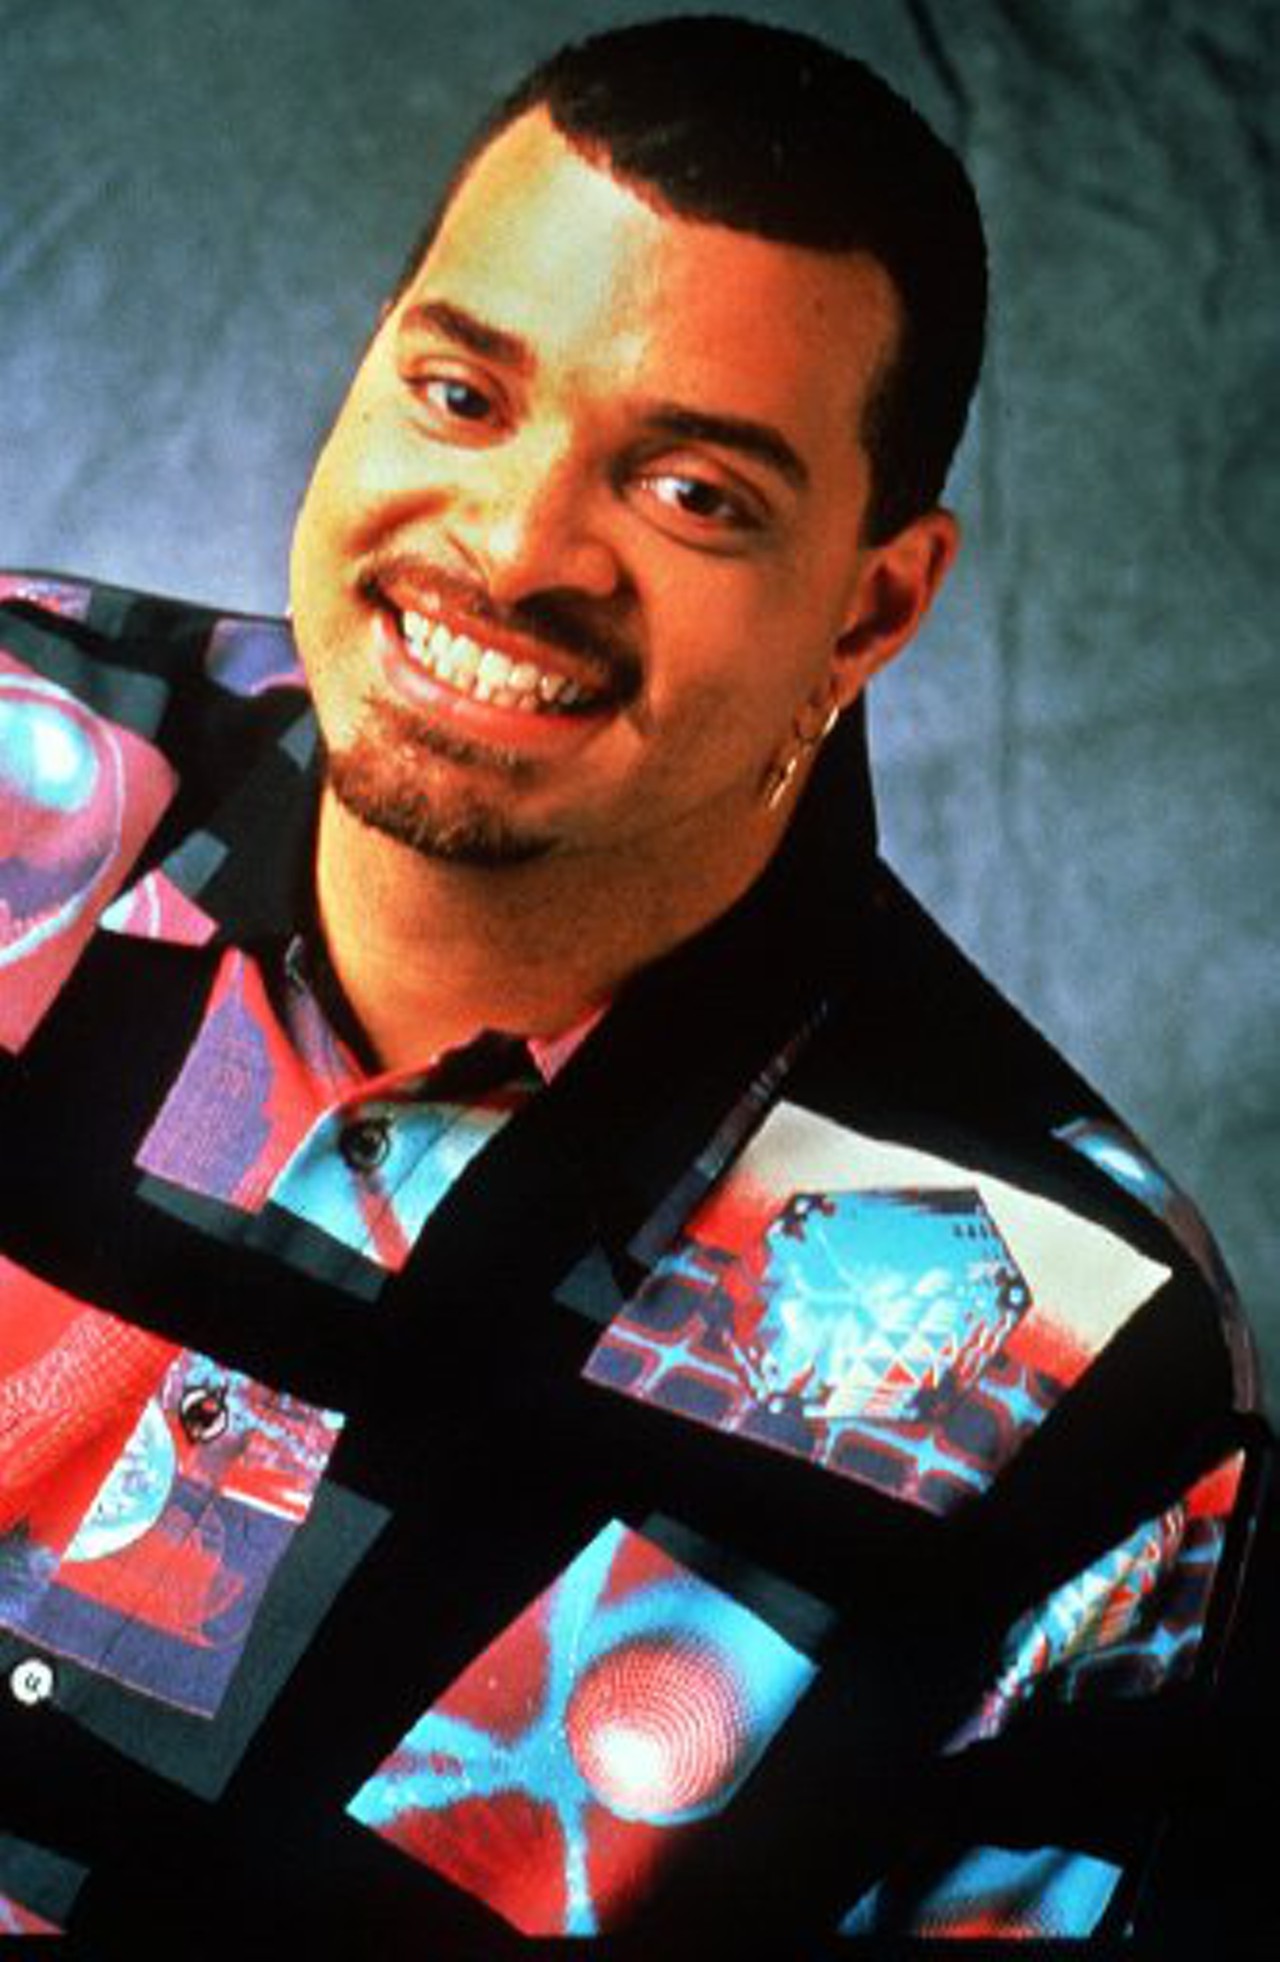 where is sinbad the comedian now